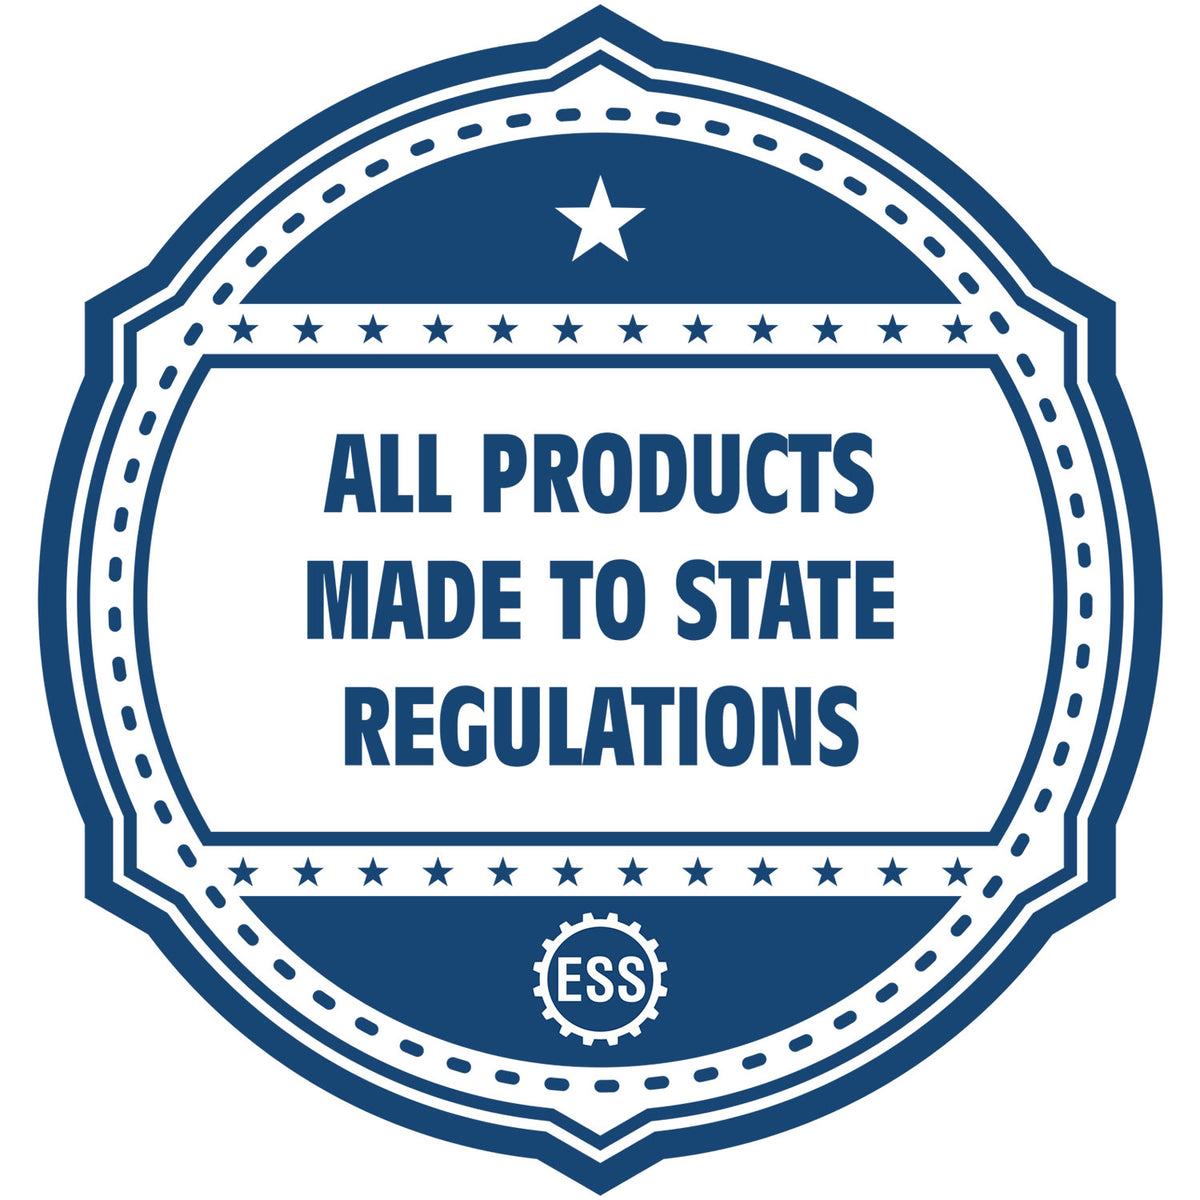 An icon or badge element for the PSI Arizona Notary Stamp showing that this product is made in compliance with state regulations.